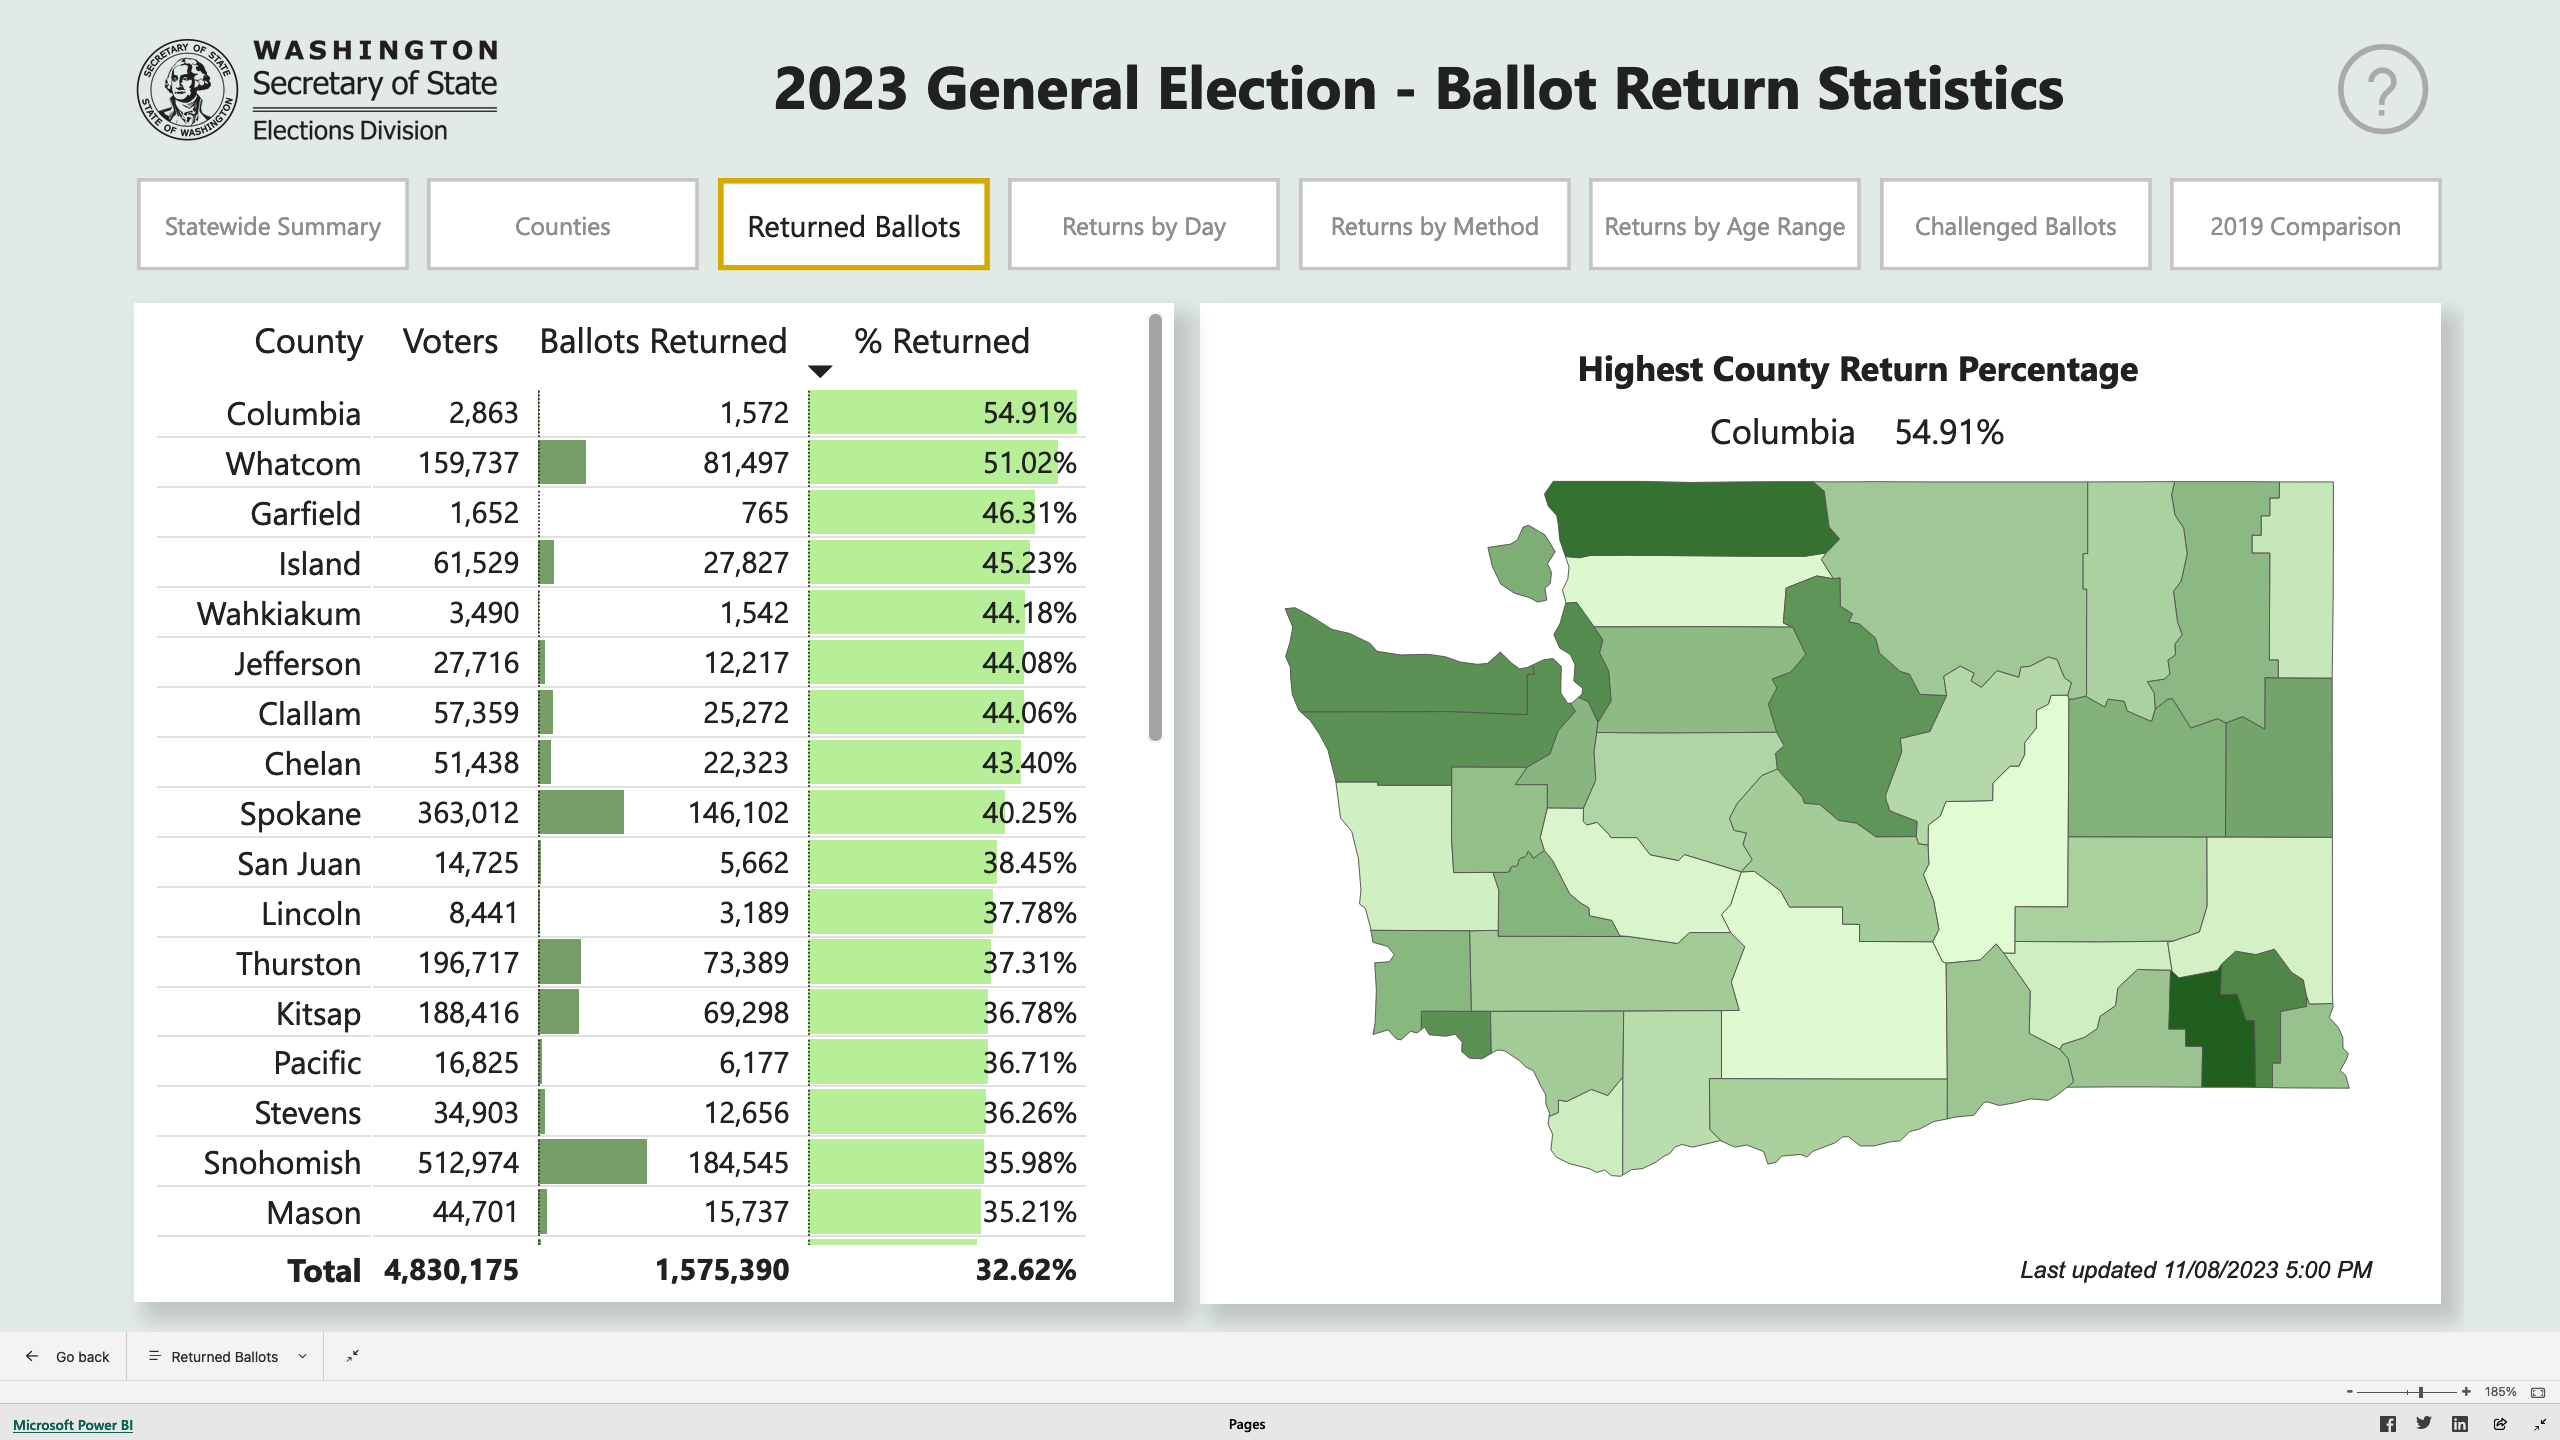 Ballot return statistics for the 2023 general election by county